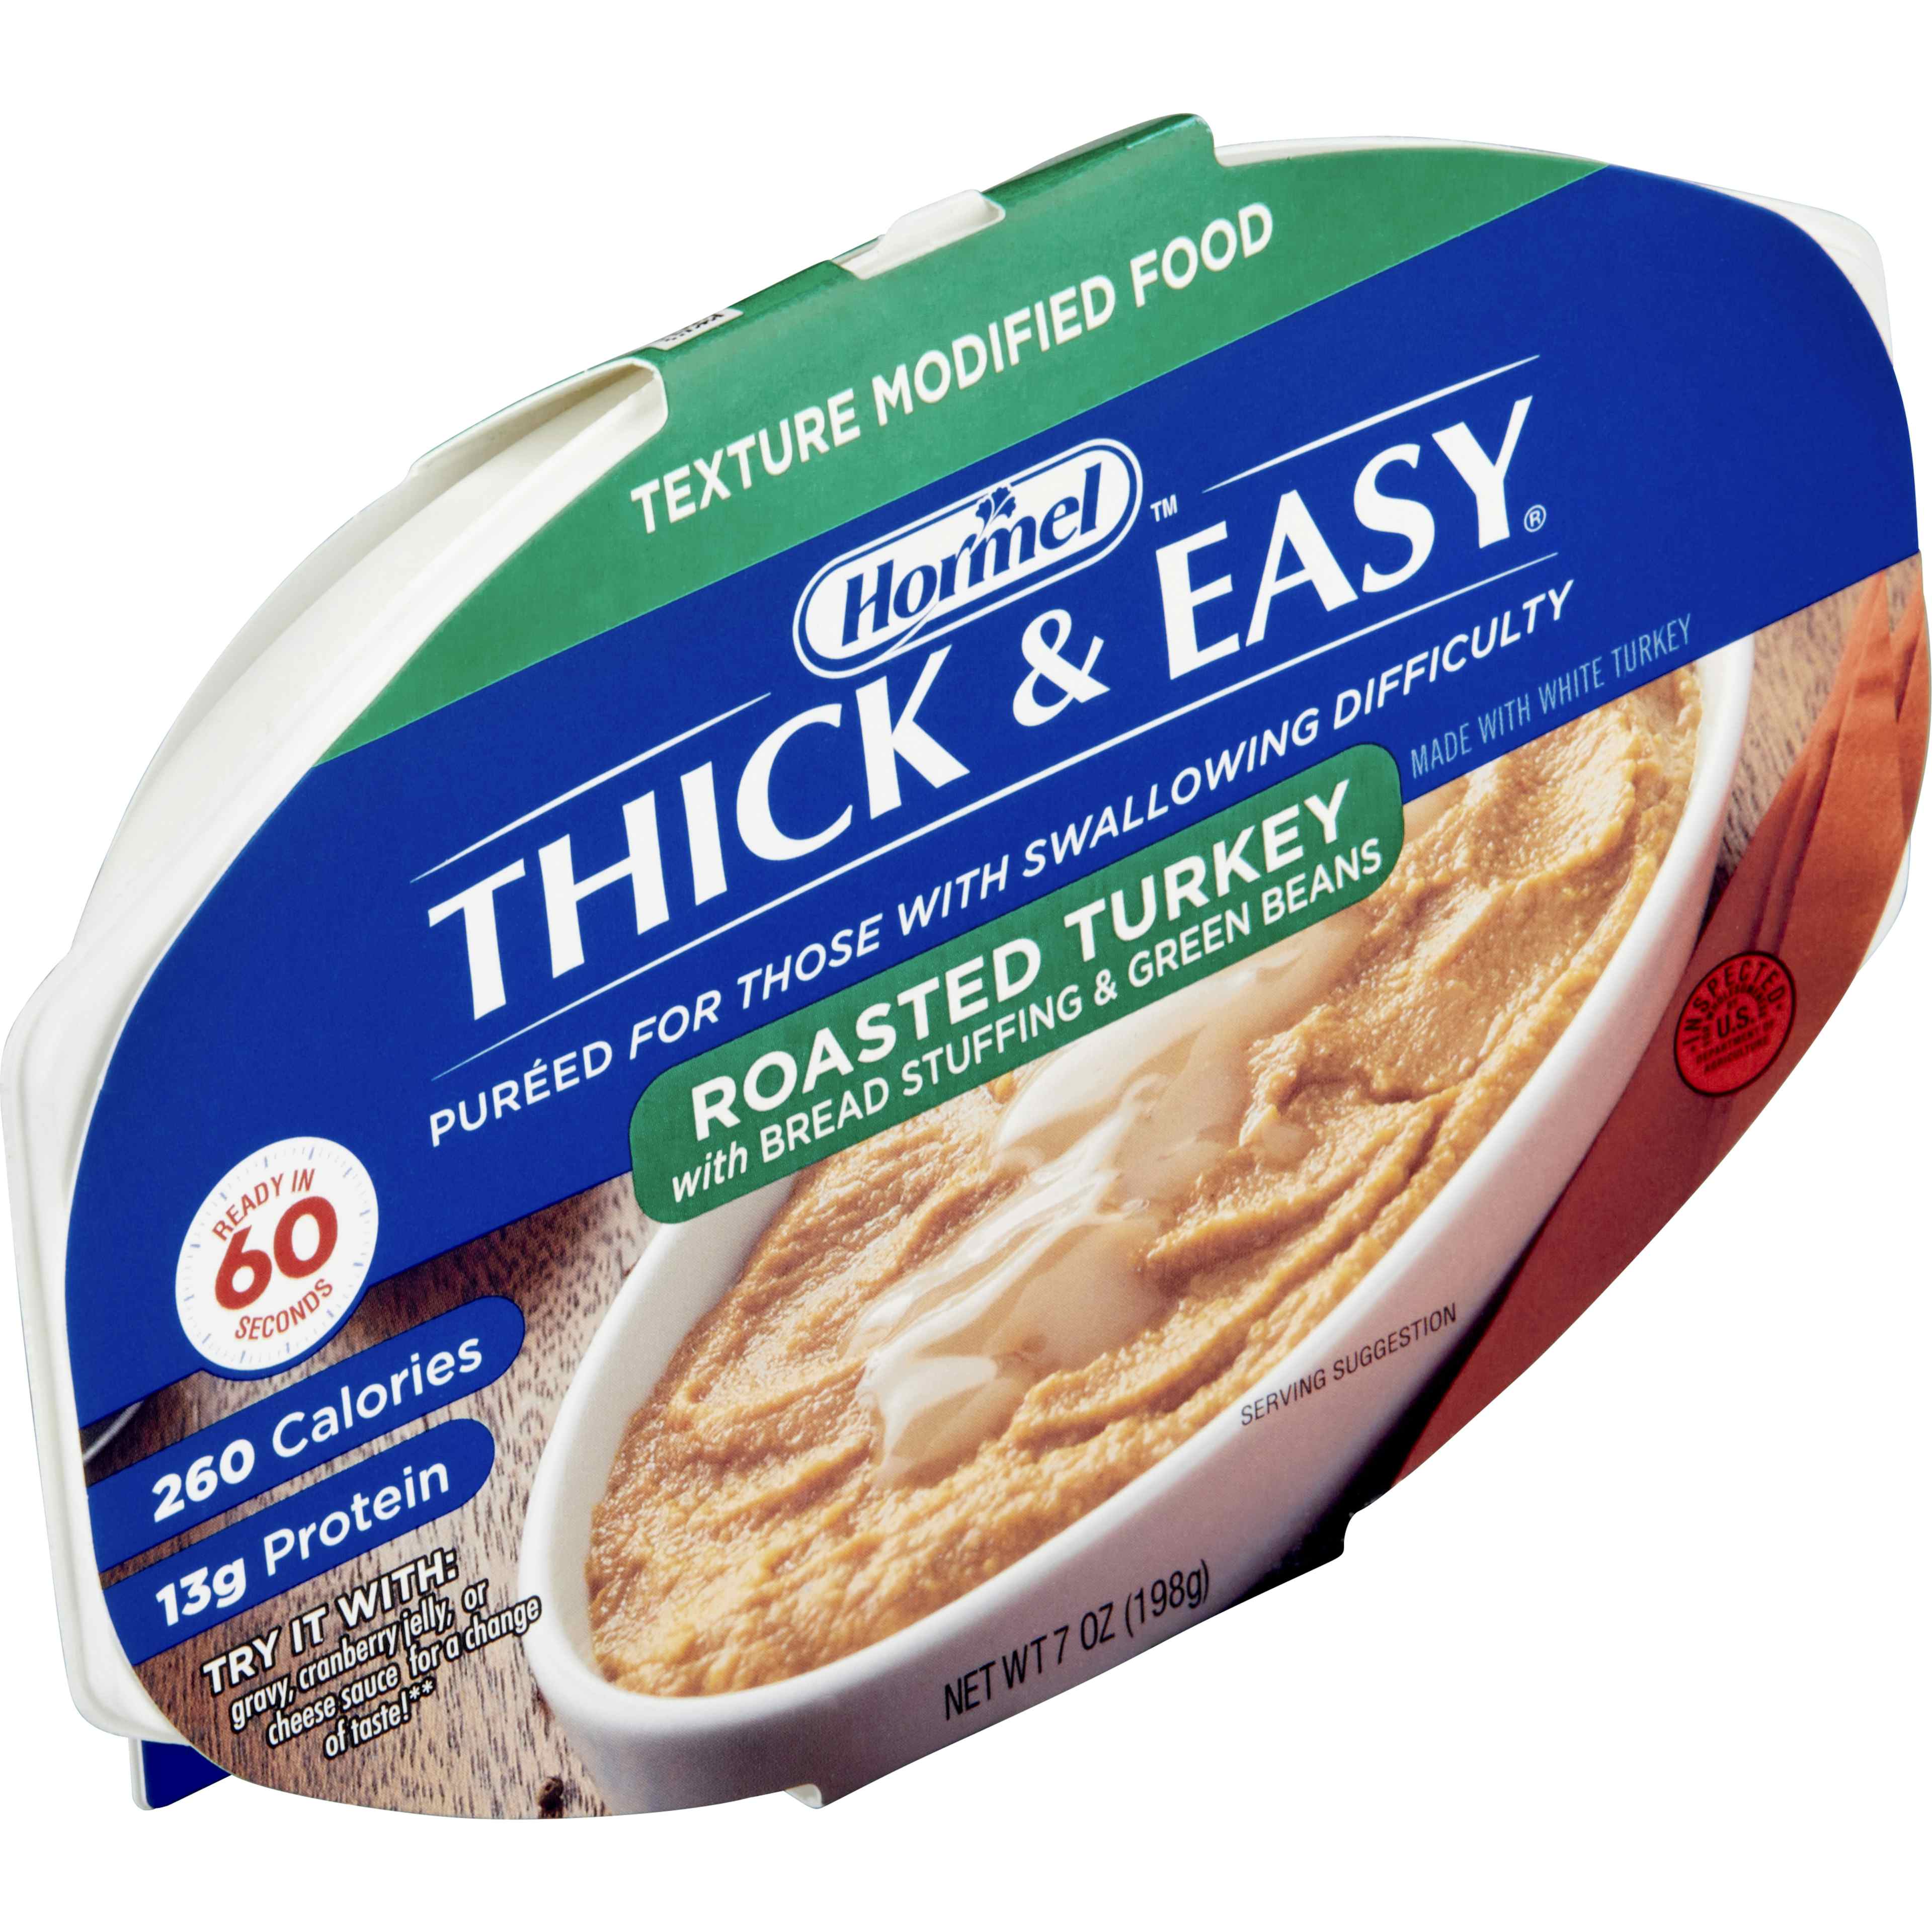 Thick & Easy Purees, Turkey with Stuffing and Green Beans